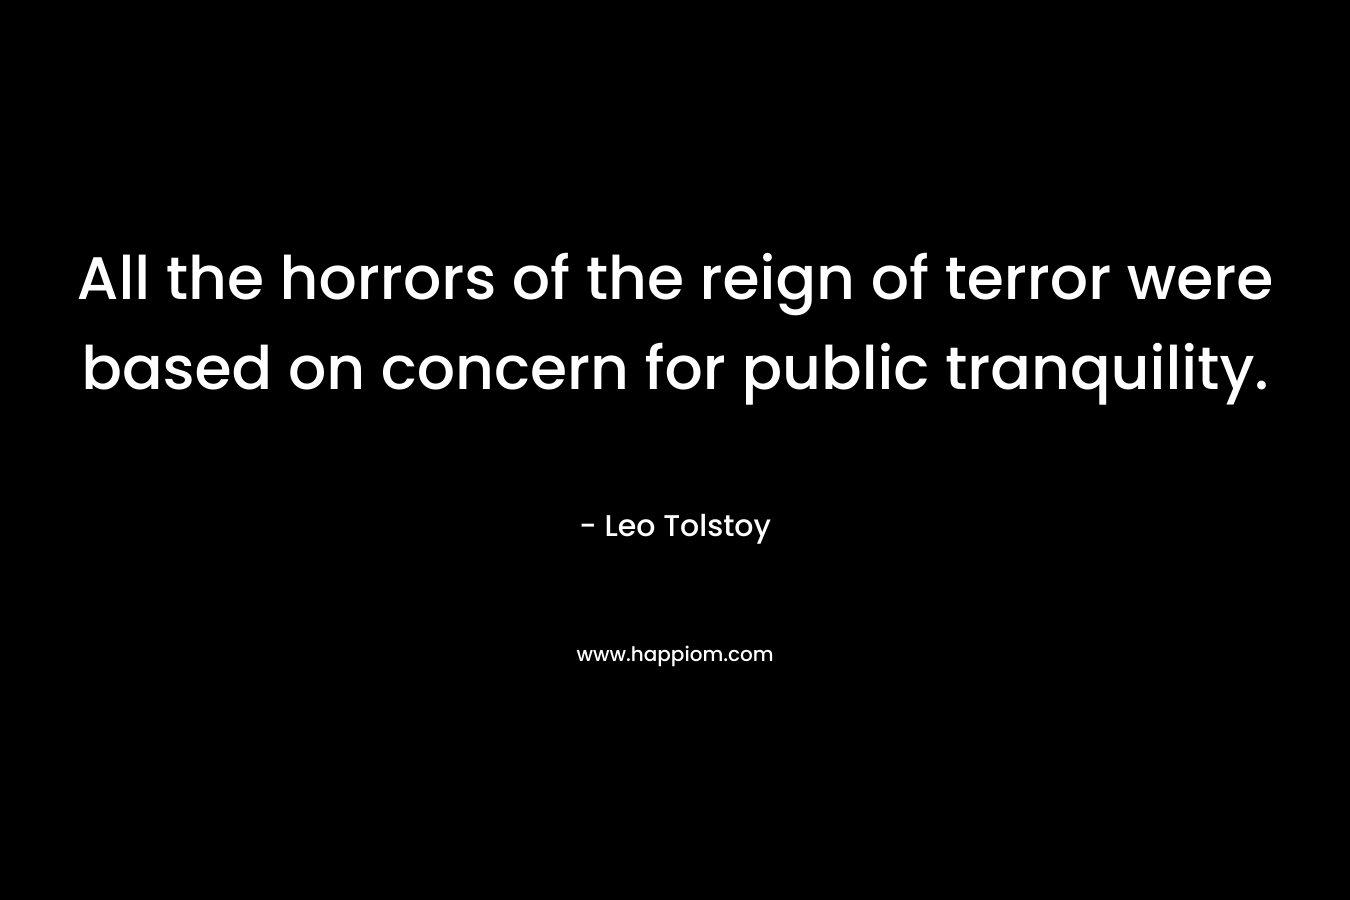 All the horrors of the reign of terror were based on concern for public tranquility. – Leo Tolstoy